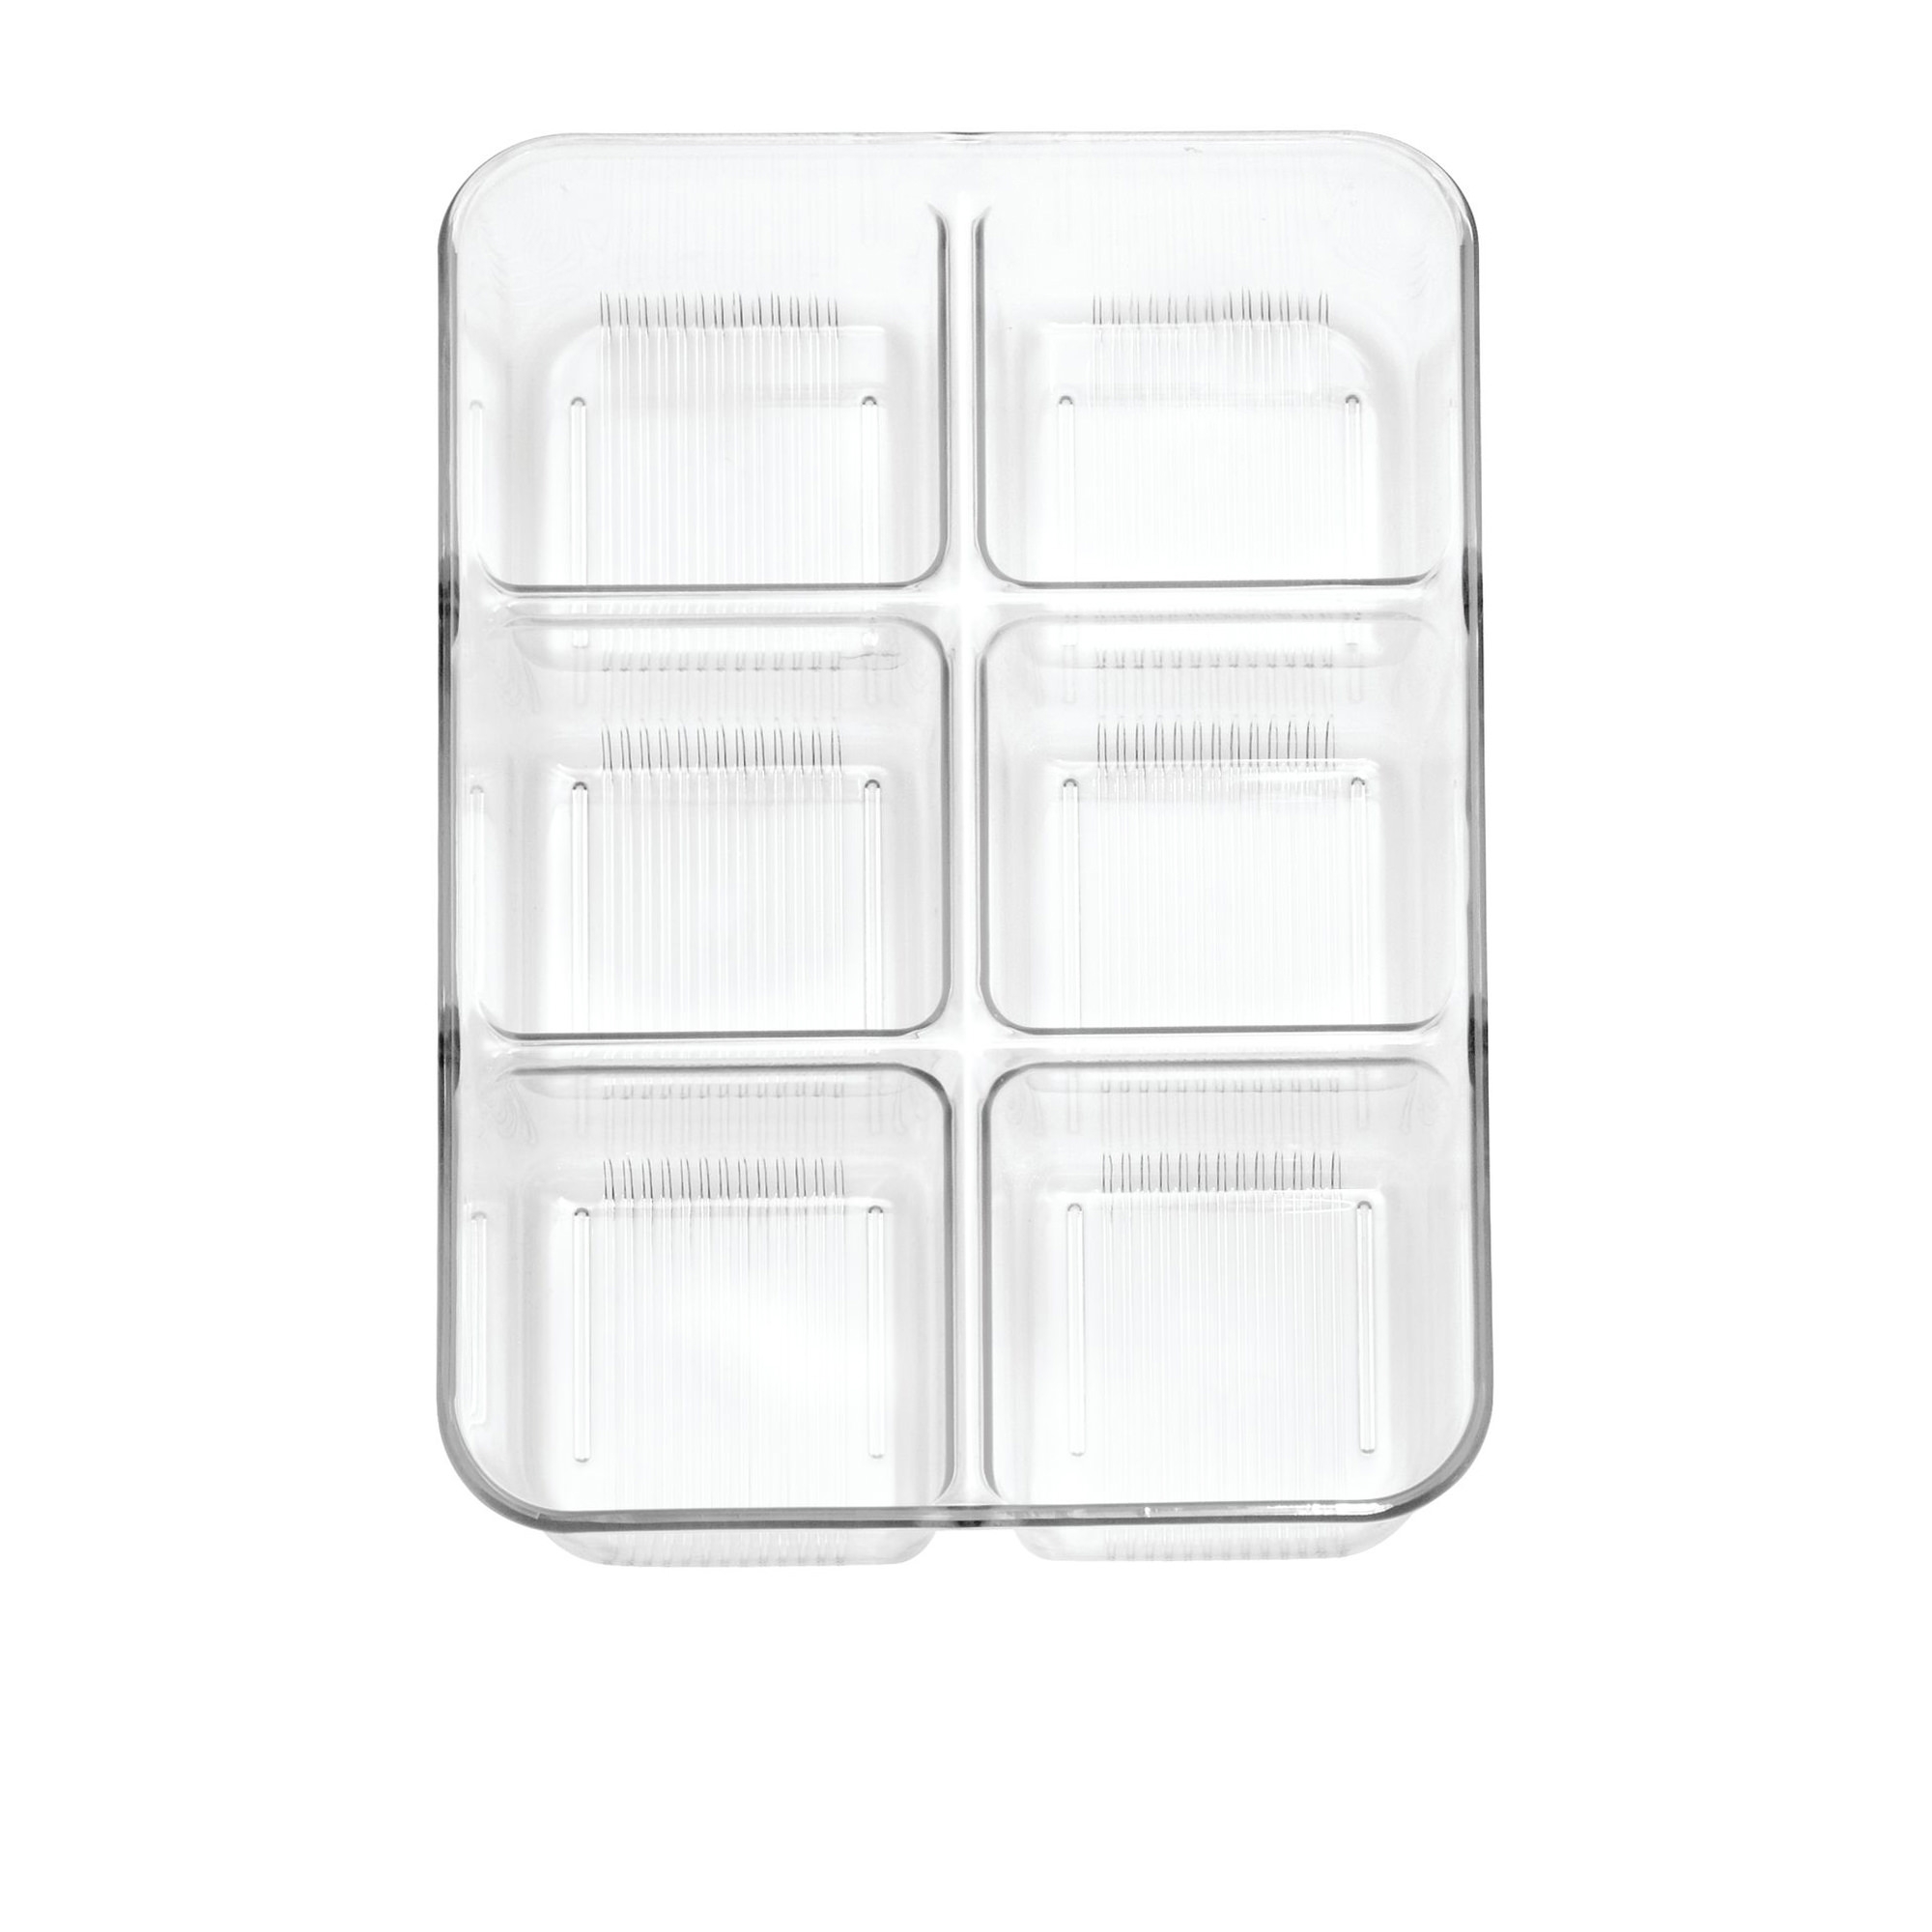 iDesign Linus Pack Organiser 6 Compartment Clear Image 2